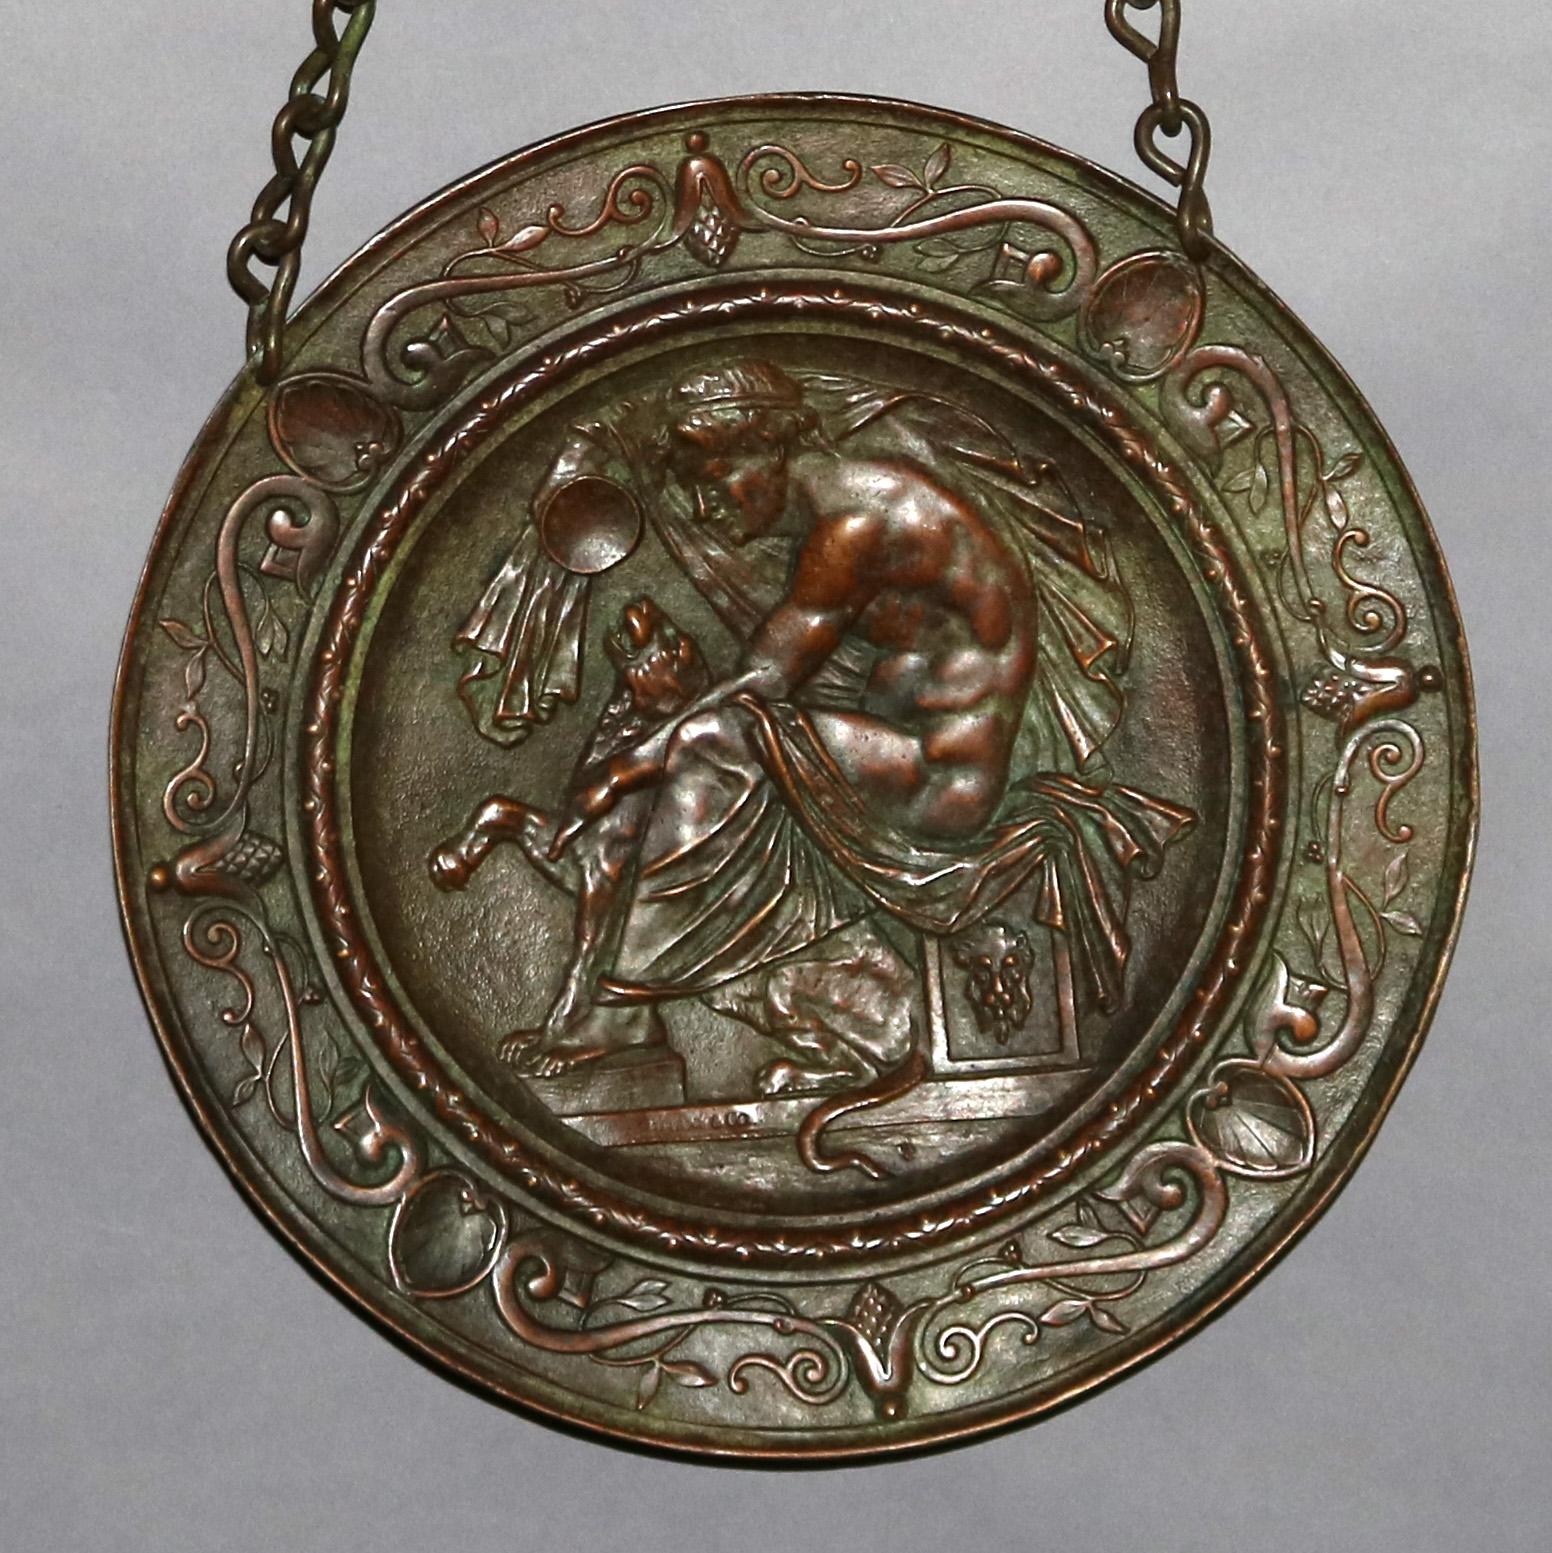 An antique hanging wall plaque by Tiffany & Co with Classical scene depicting partially nude man with lioness, surround with scroll, schell and foliate design, suspended by chain, stamped lower right as photographed, circa 1900.

Measures: .75